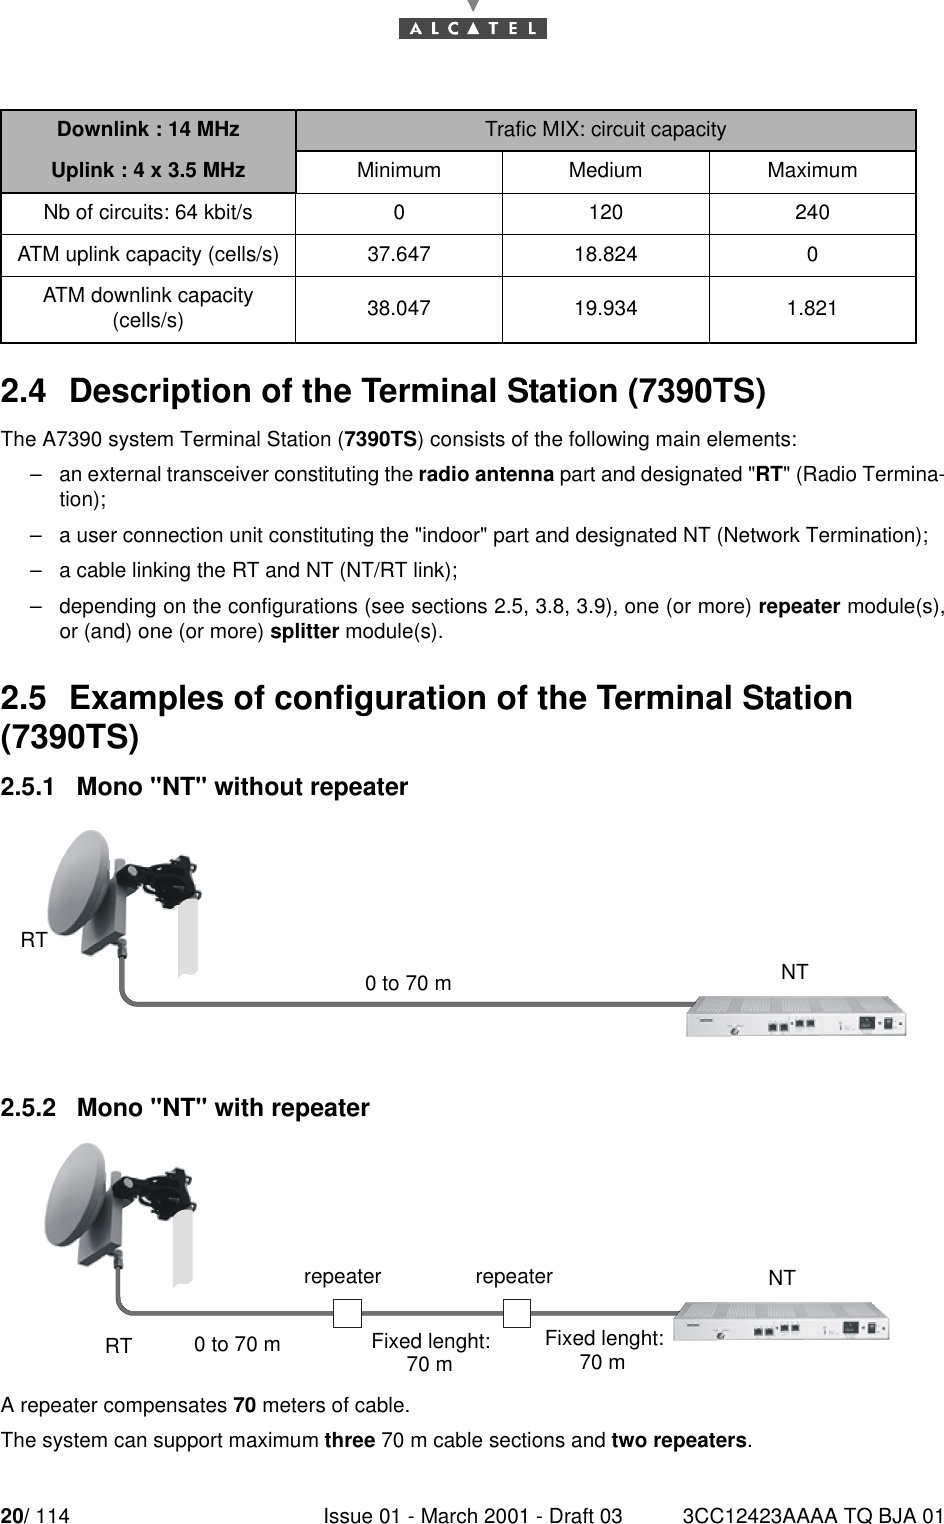 20/ 114 Issue 01 - March 2001 - Draft 03 3CC12423AAAA TQ BJA 01242.4  Description of the Terminal Station (7390TS)The A7390 system Terminal Station (7390TS) consists of the following main elements:–an external transceiver constituting the radio antenna part and designated &quot;RT&quot; (Radio Termina-tion);–a user connection unit constituting the &quot;indoor&quot; part and designated NT (Network Termination);–a cable linking the RT and NT (NT/RT link);–depending on the configurations (see sections 2.5, 3.8, 3.9), one (or more) repeater module(s),or (and) one (or more) splitter module(s).2.5  Examples of configuration of the Terminal Station (7390TS)2.5.1   Mono &quot;NT&quot; without repeater2.5.2   Mono &quot;NT&quot; with repeaterA repeater compensates 70 meters of cable.The system can support maximum three 70 m cable sections and two repeaters.Downlink : 14 MHz Trafic MIX: circuit capacityUplink : 4 x 3.5 MHz Minimum Medium MaximumNb of circuits: 64 kbit/s 0 120 240ATM uplink capacity (cells/s) 37.647 18.824 0ATM downlink capacity(cells/s) 38.047 19.934 1.8210 to 70 m RT NTrepeater repeater0 to 70 mRTNTFixed lenght:70 m Fixed lenght:70 m